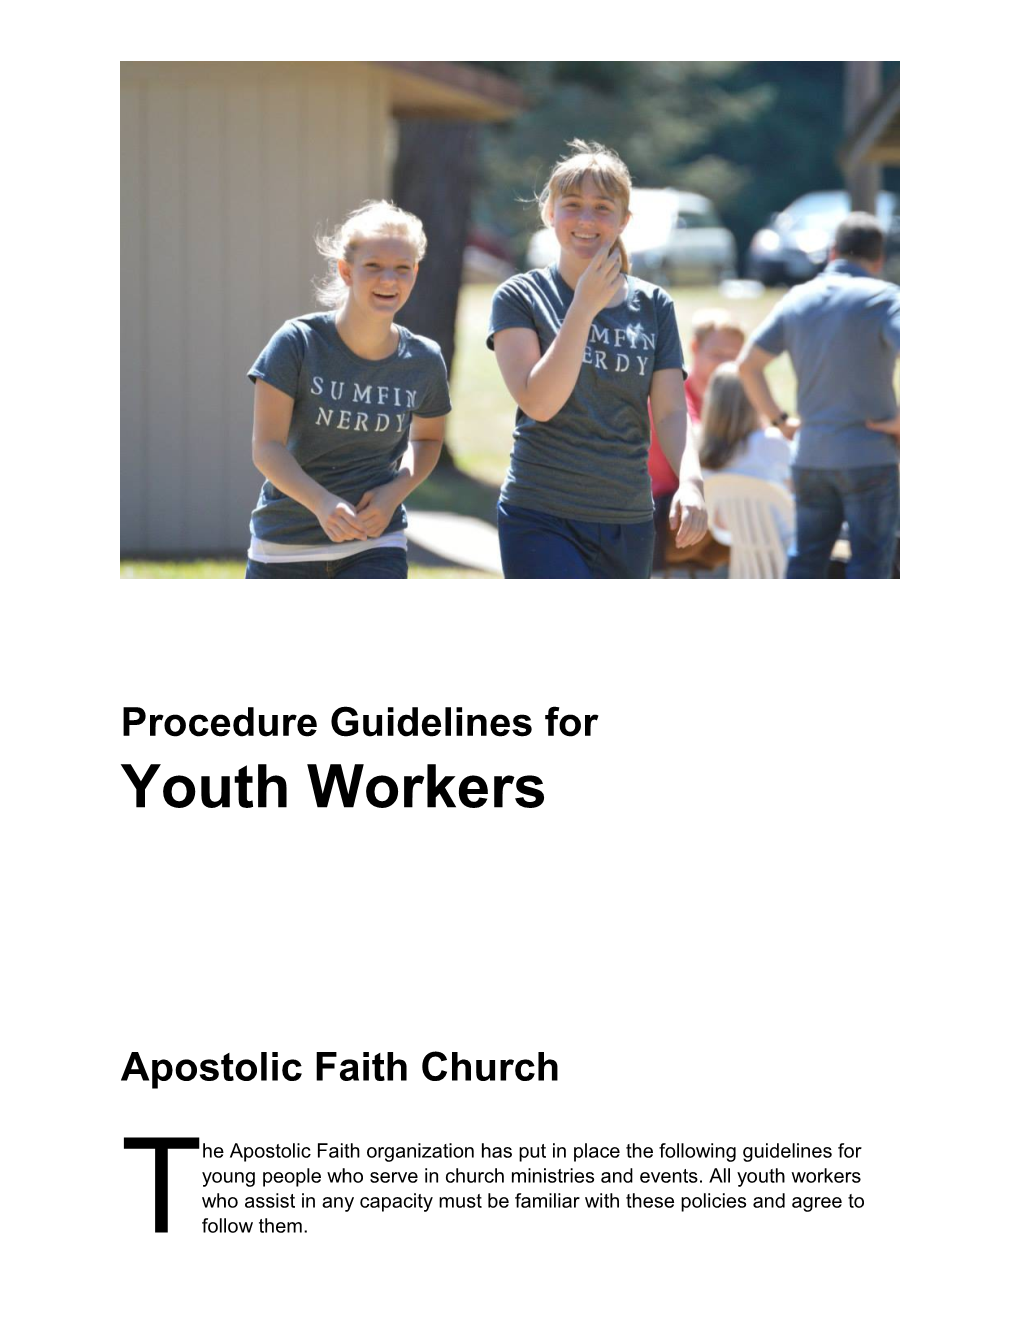 Procedure Guidelines for Youth Workers